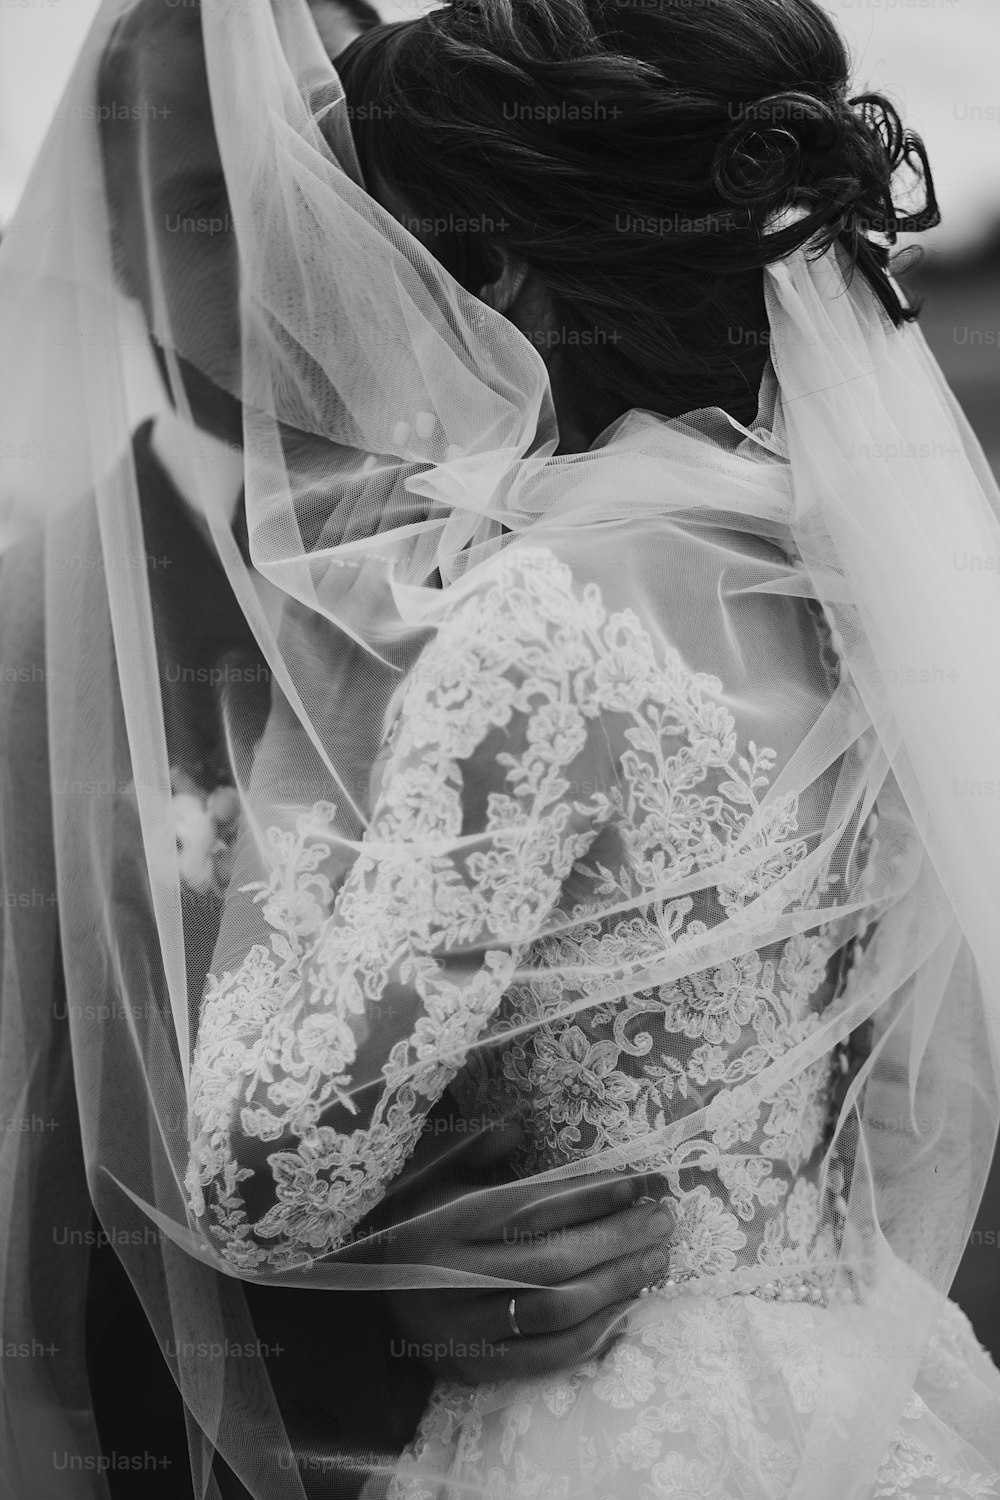 stylish happy bride and groom embracing and hugging under veil, near retro car. luxury wedding couple newlyweds, sensual romantic moment. space for text. black white photo